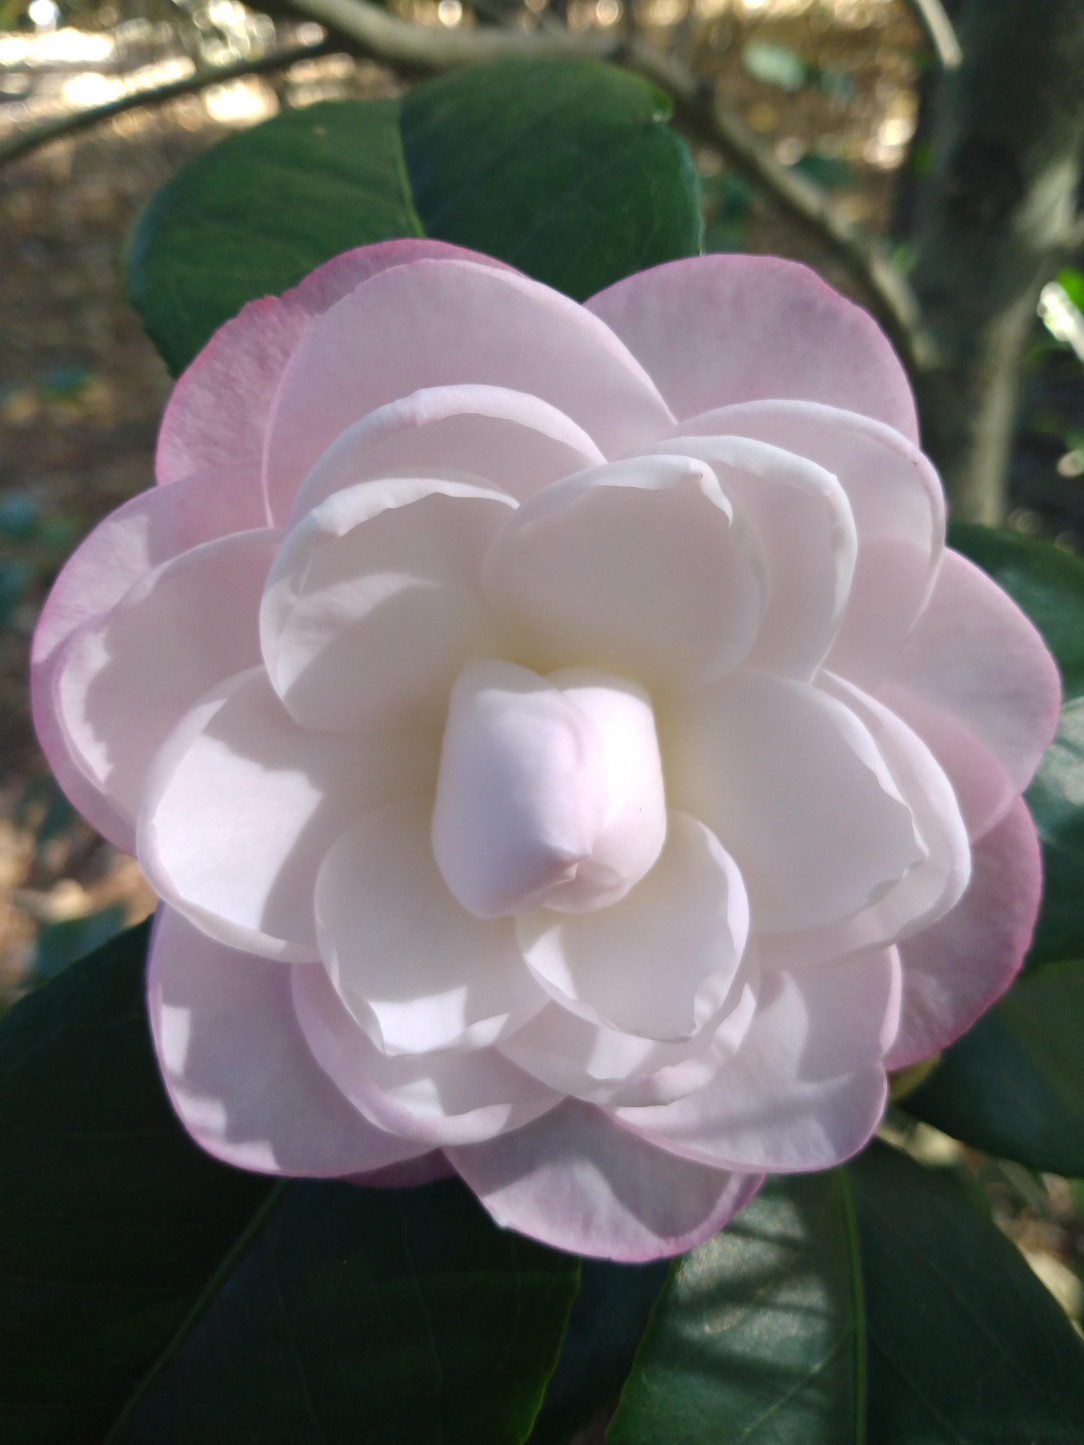 Adore with me, if you will, this perfect Japanese Camellia